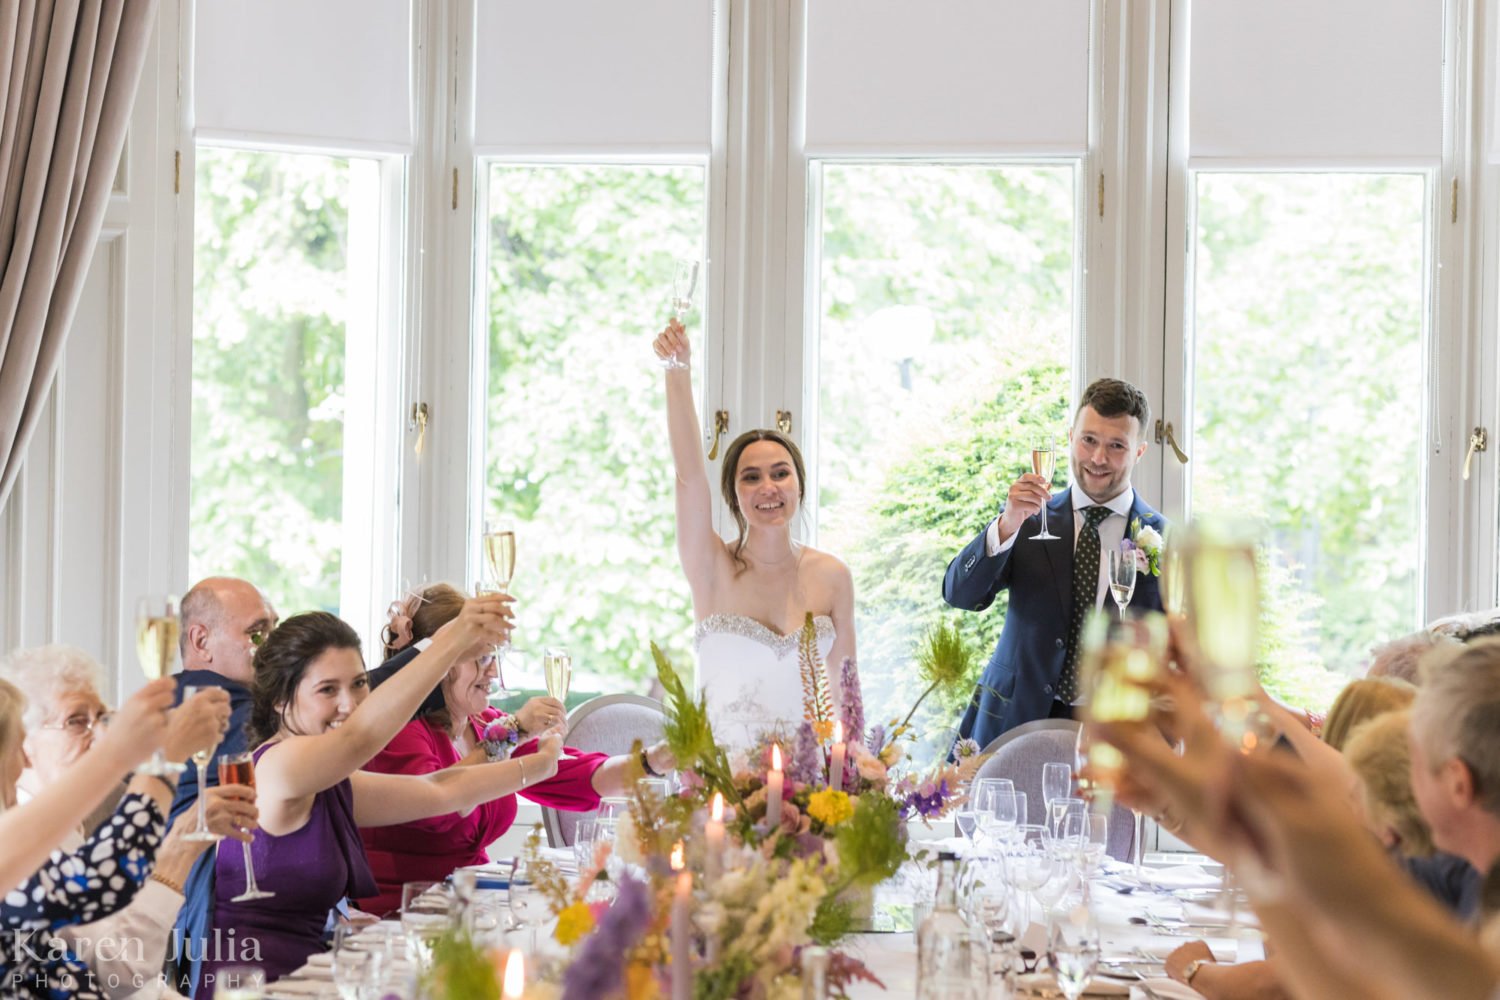 bride and groom raise glasses in a toast during speeches